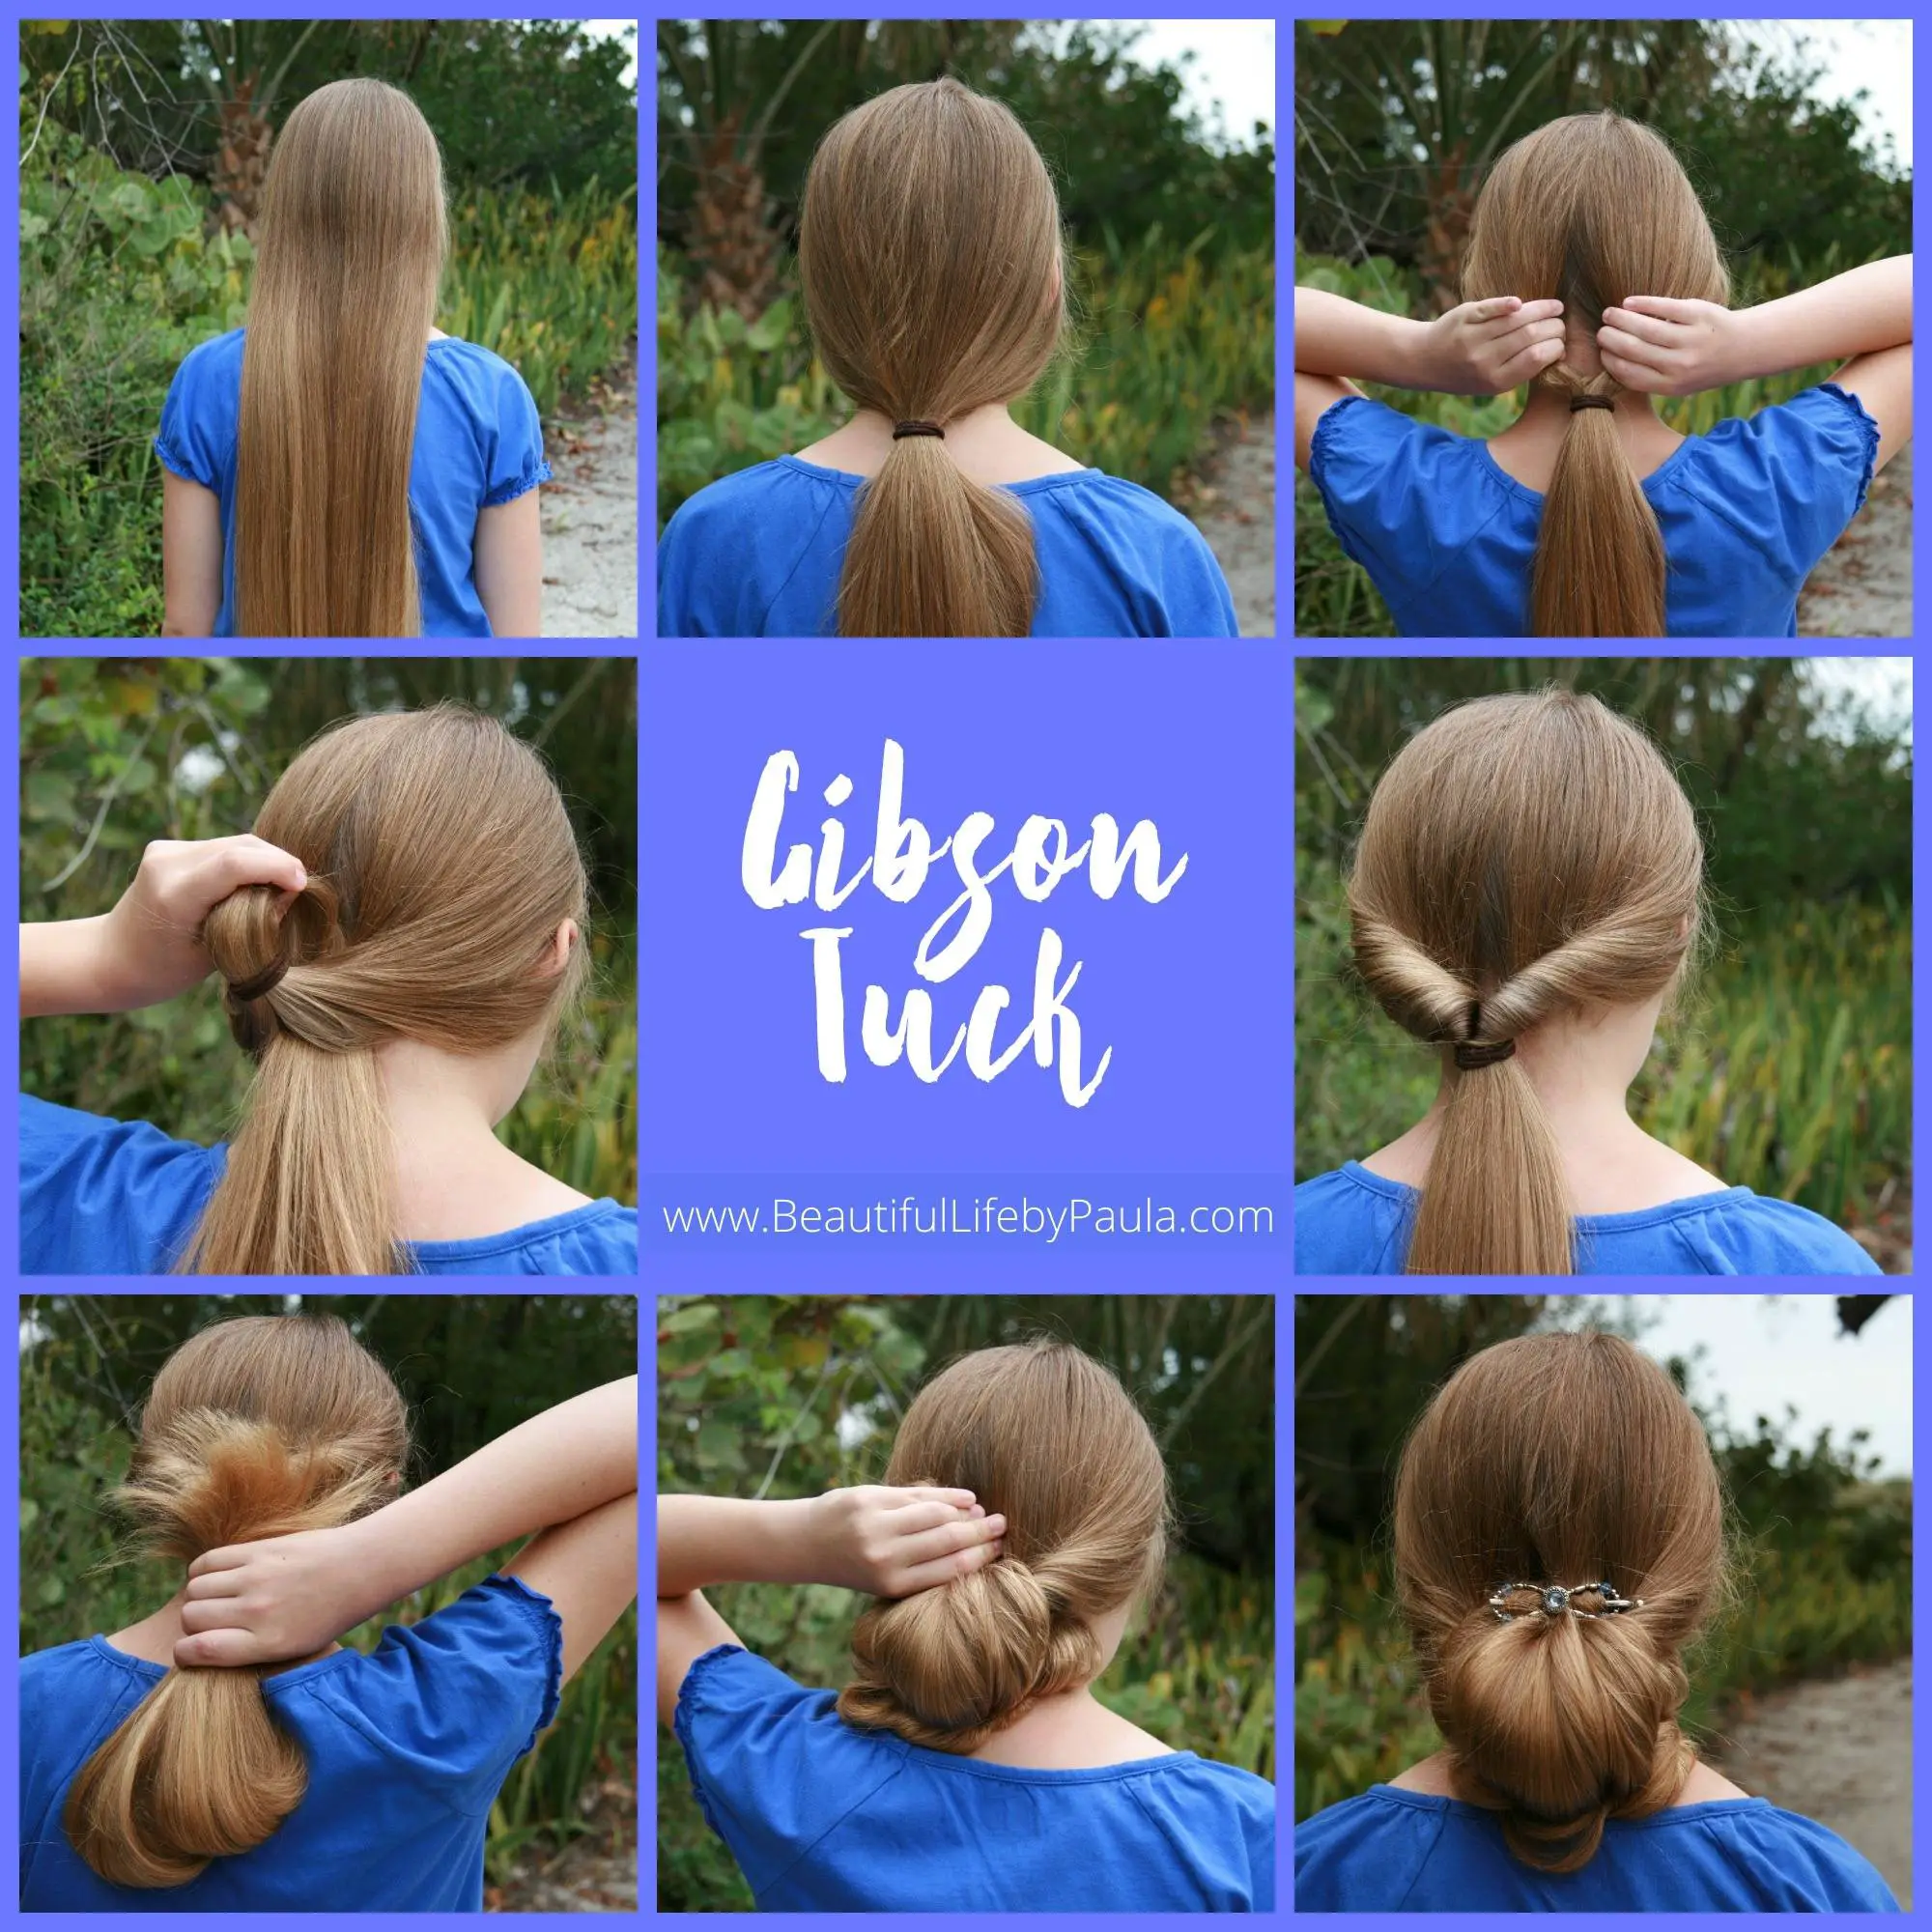 Gibson Tuck tutorial step by step pictures